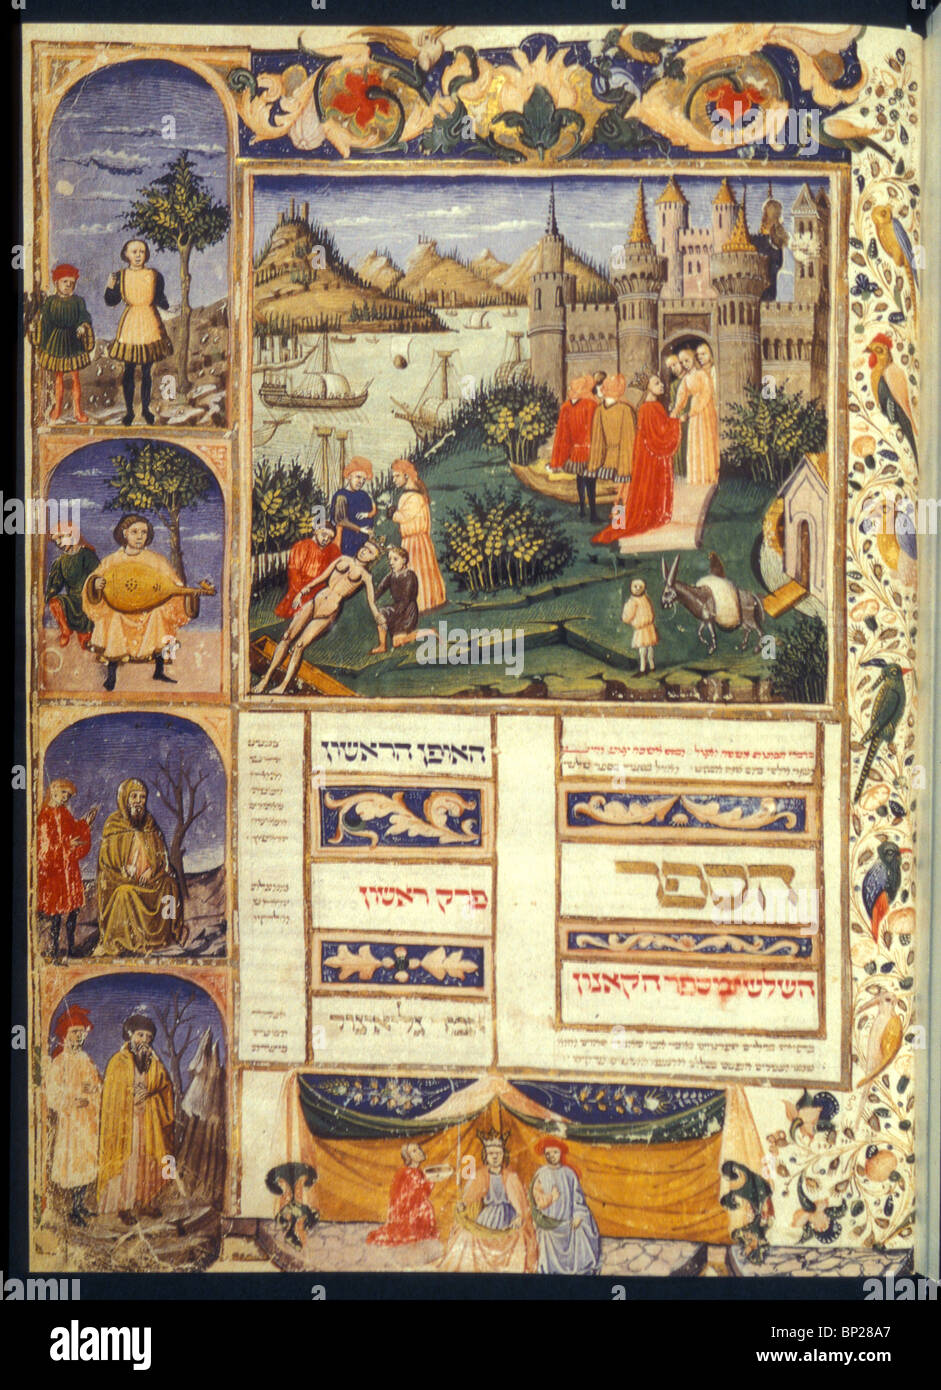 1997. ILLUMINATED HEBREW MANUSCRIPT OF AVICENNA'S CANON OF MEDICINE, DATING FROM THE 15TH. C. Stock Photo